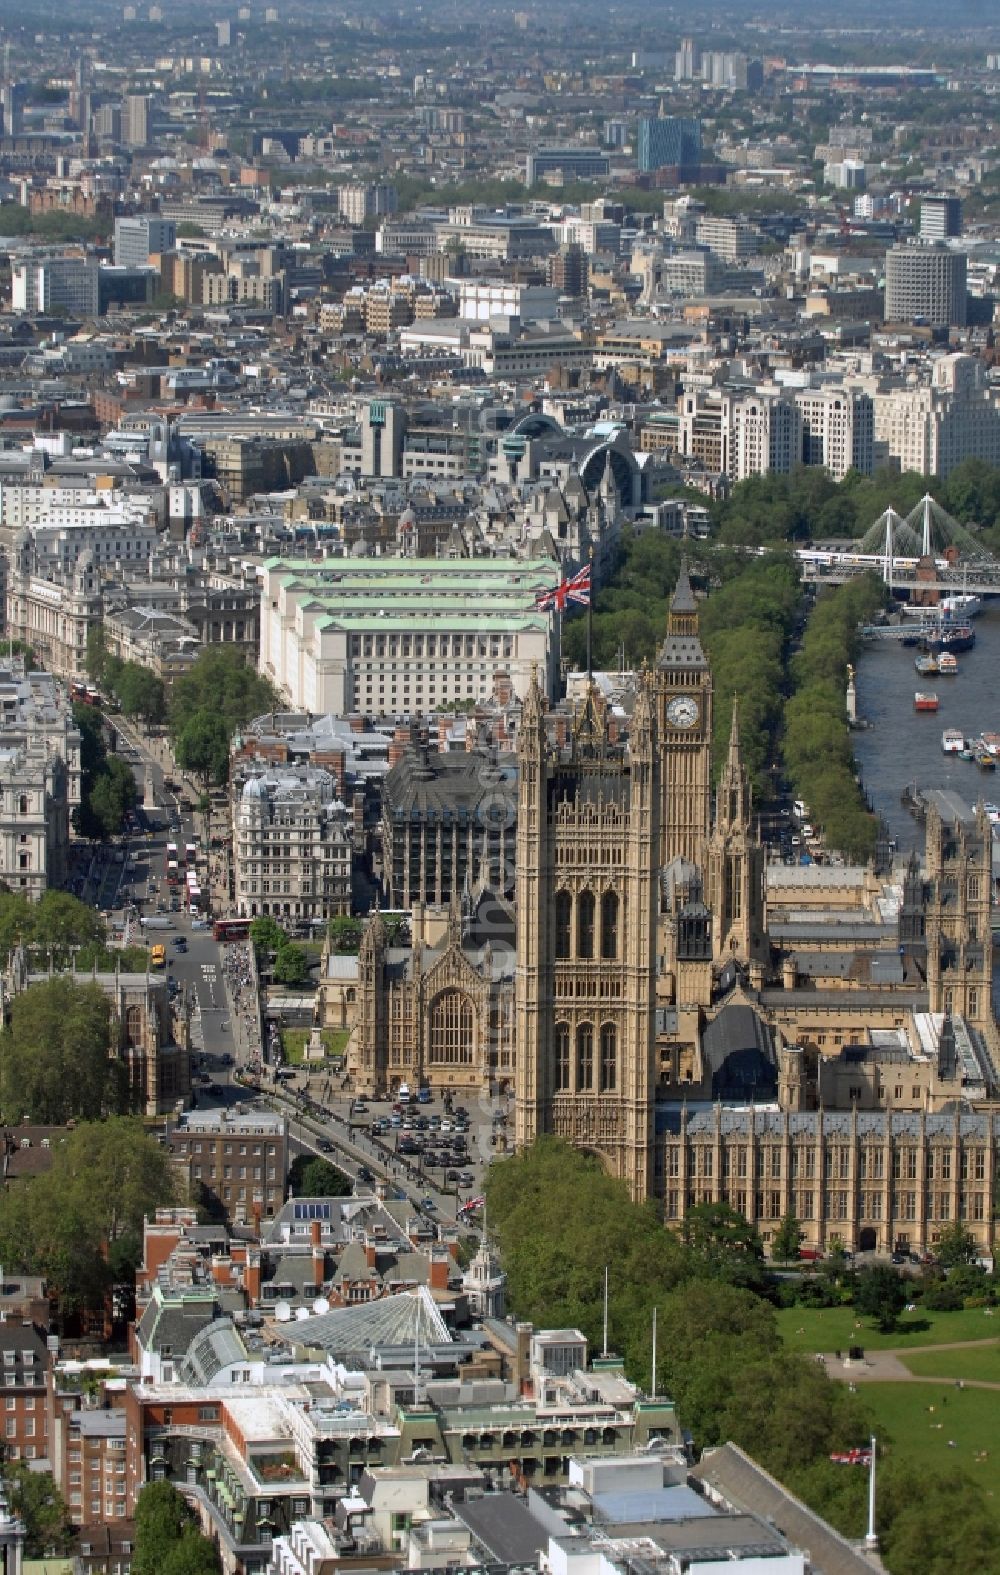 London from above - View of the Palace of Westminster / Westminster Palace in London. monumental, neo-Gothic style building in London where the meeting consists of the House of Commons and the House of Lords, British Parliament. This is under the UNESCO World Heritage landmark located in the City of Westminster on Parliament Square, close to government buildings at Whitehall. The most famous part of the palace is the Clock Tower (Clock Tower), with the bell Big Ben